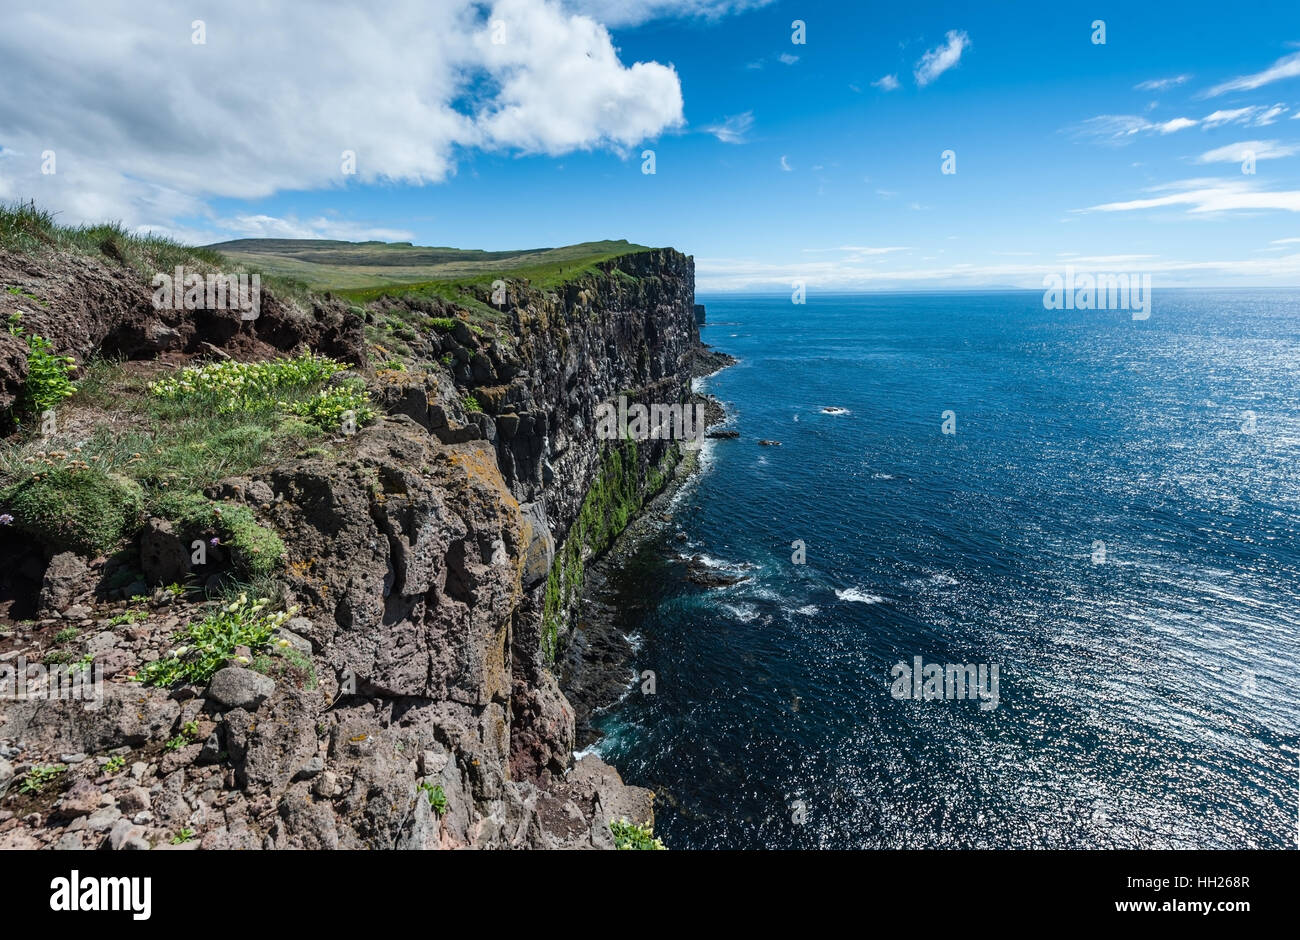 Látrabjarg, is a promontory and the westernmost point in Iceland. The cliffs are home to millions of birds, including puffins. Stock Photo